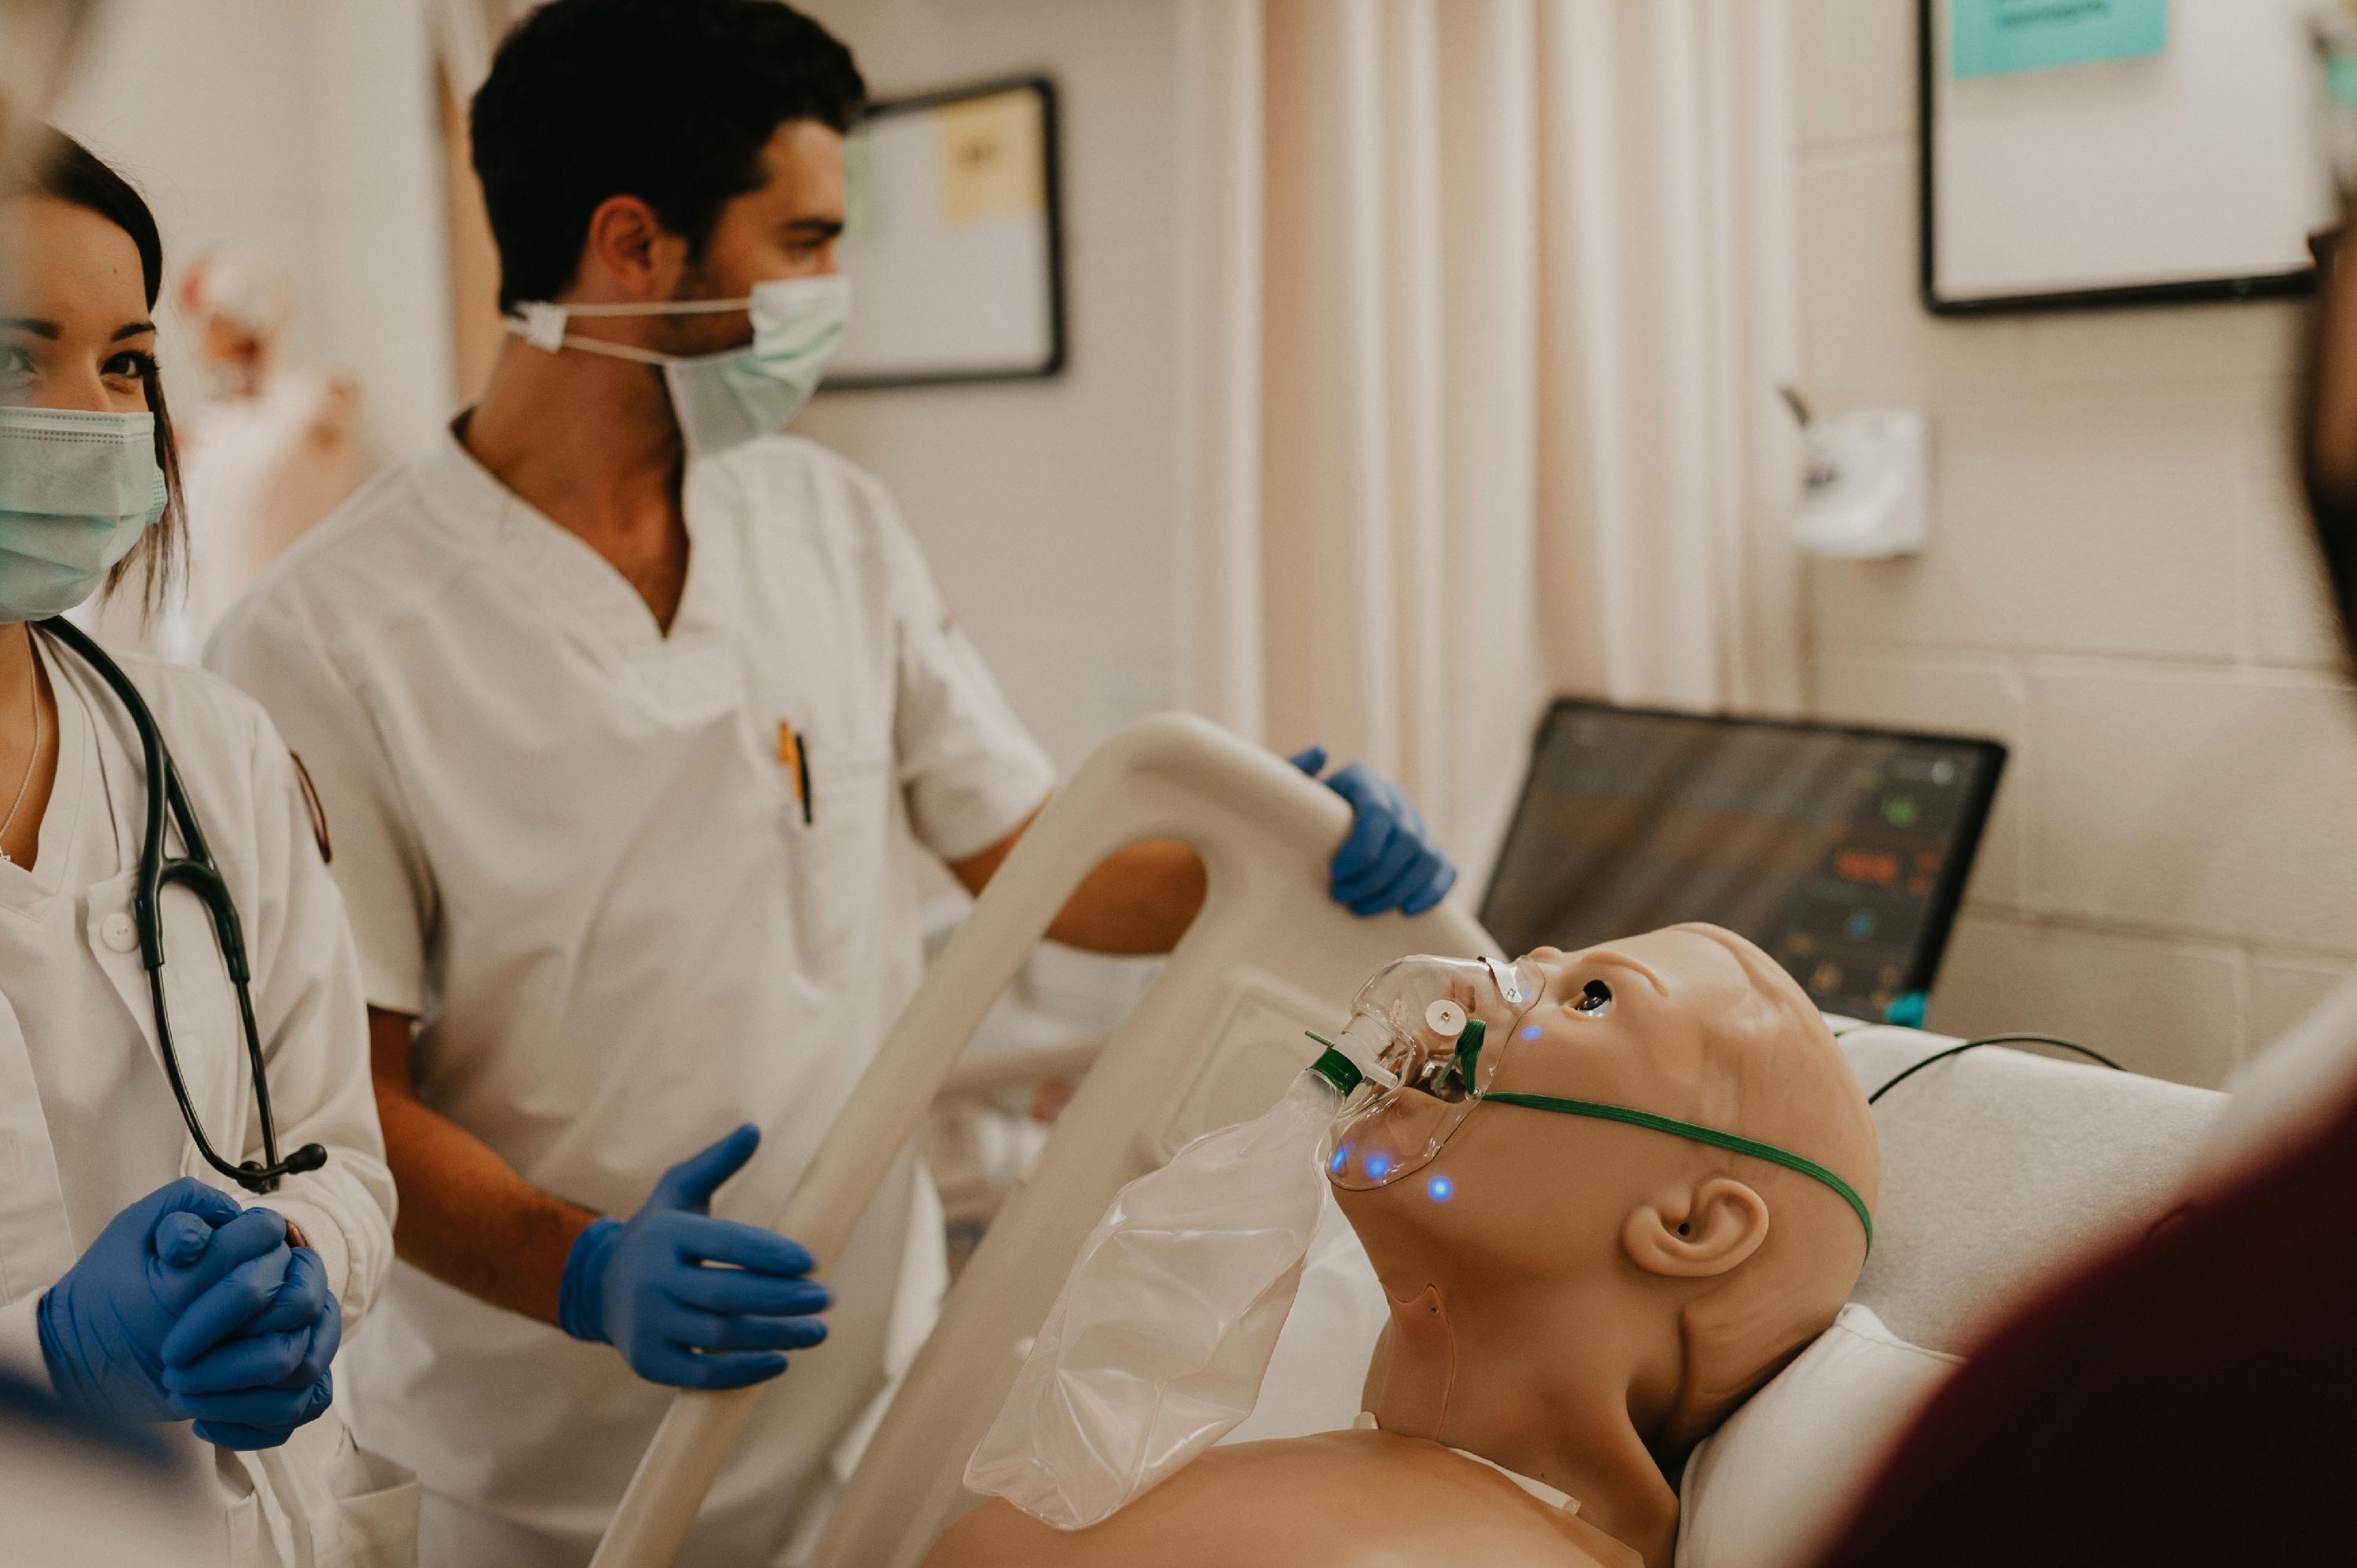 Nursing students work with a respirator on a manikin